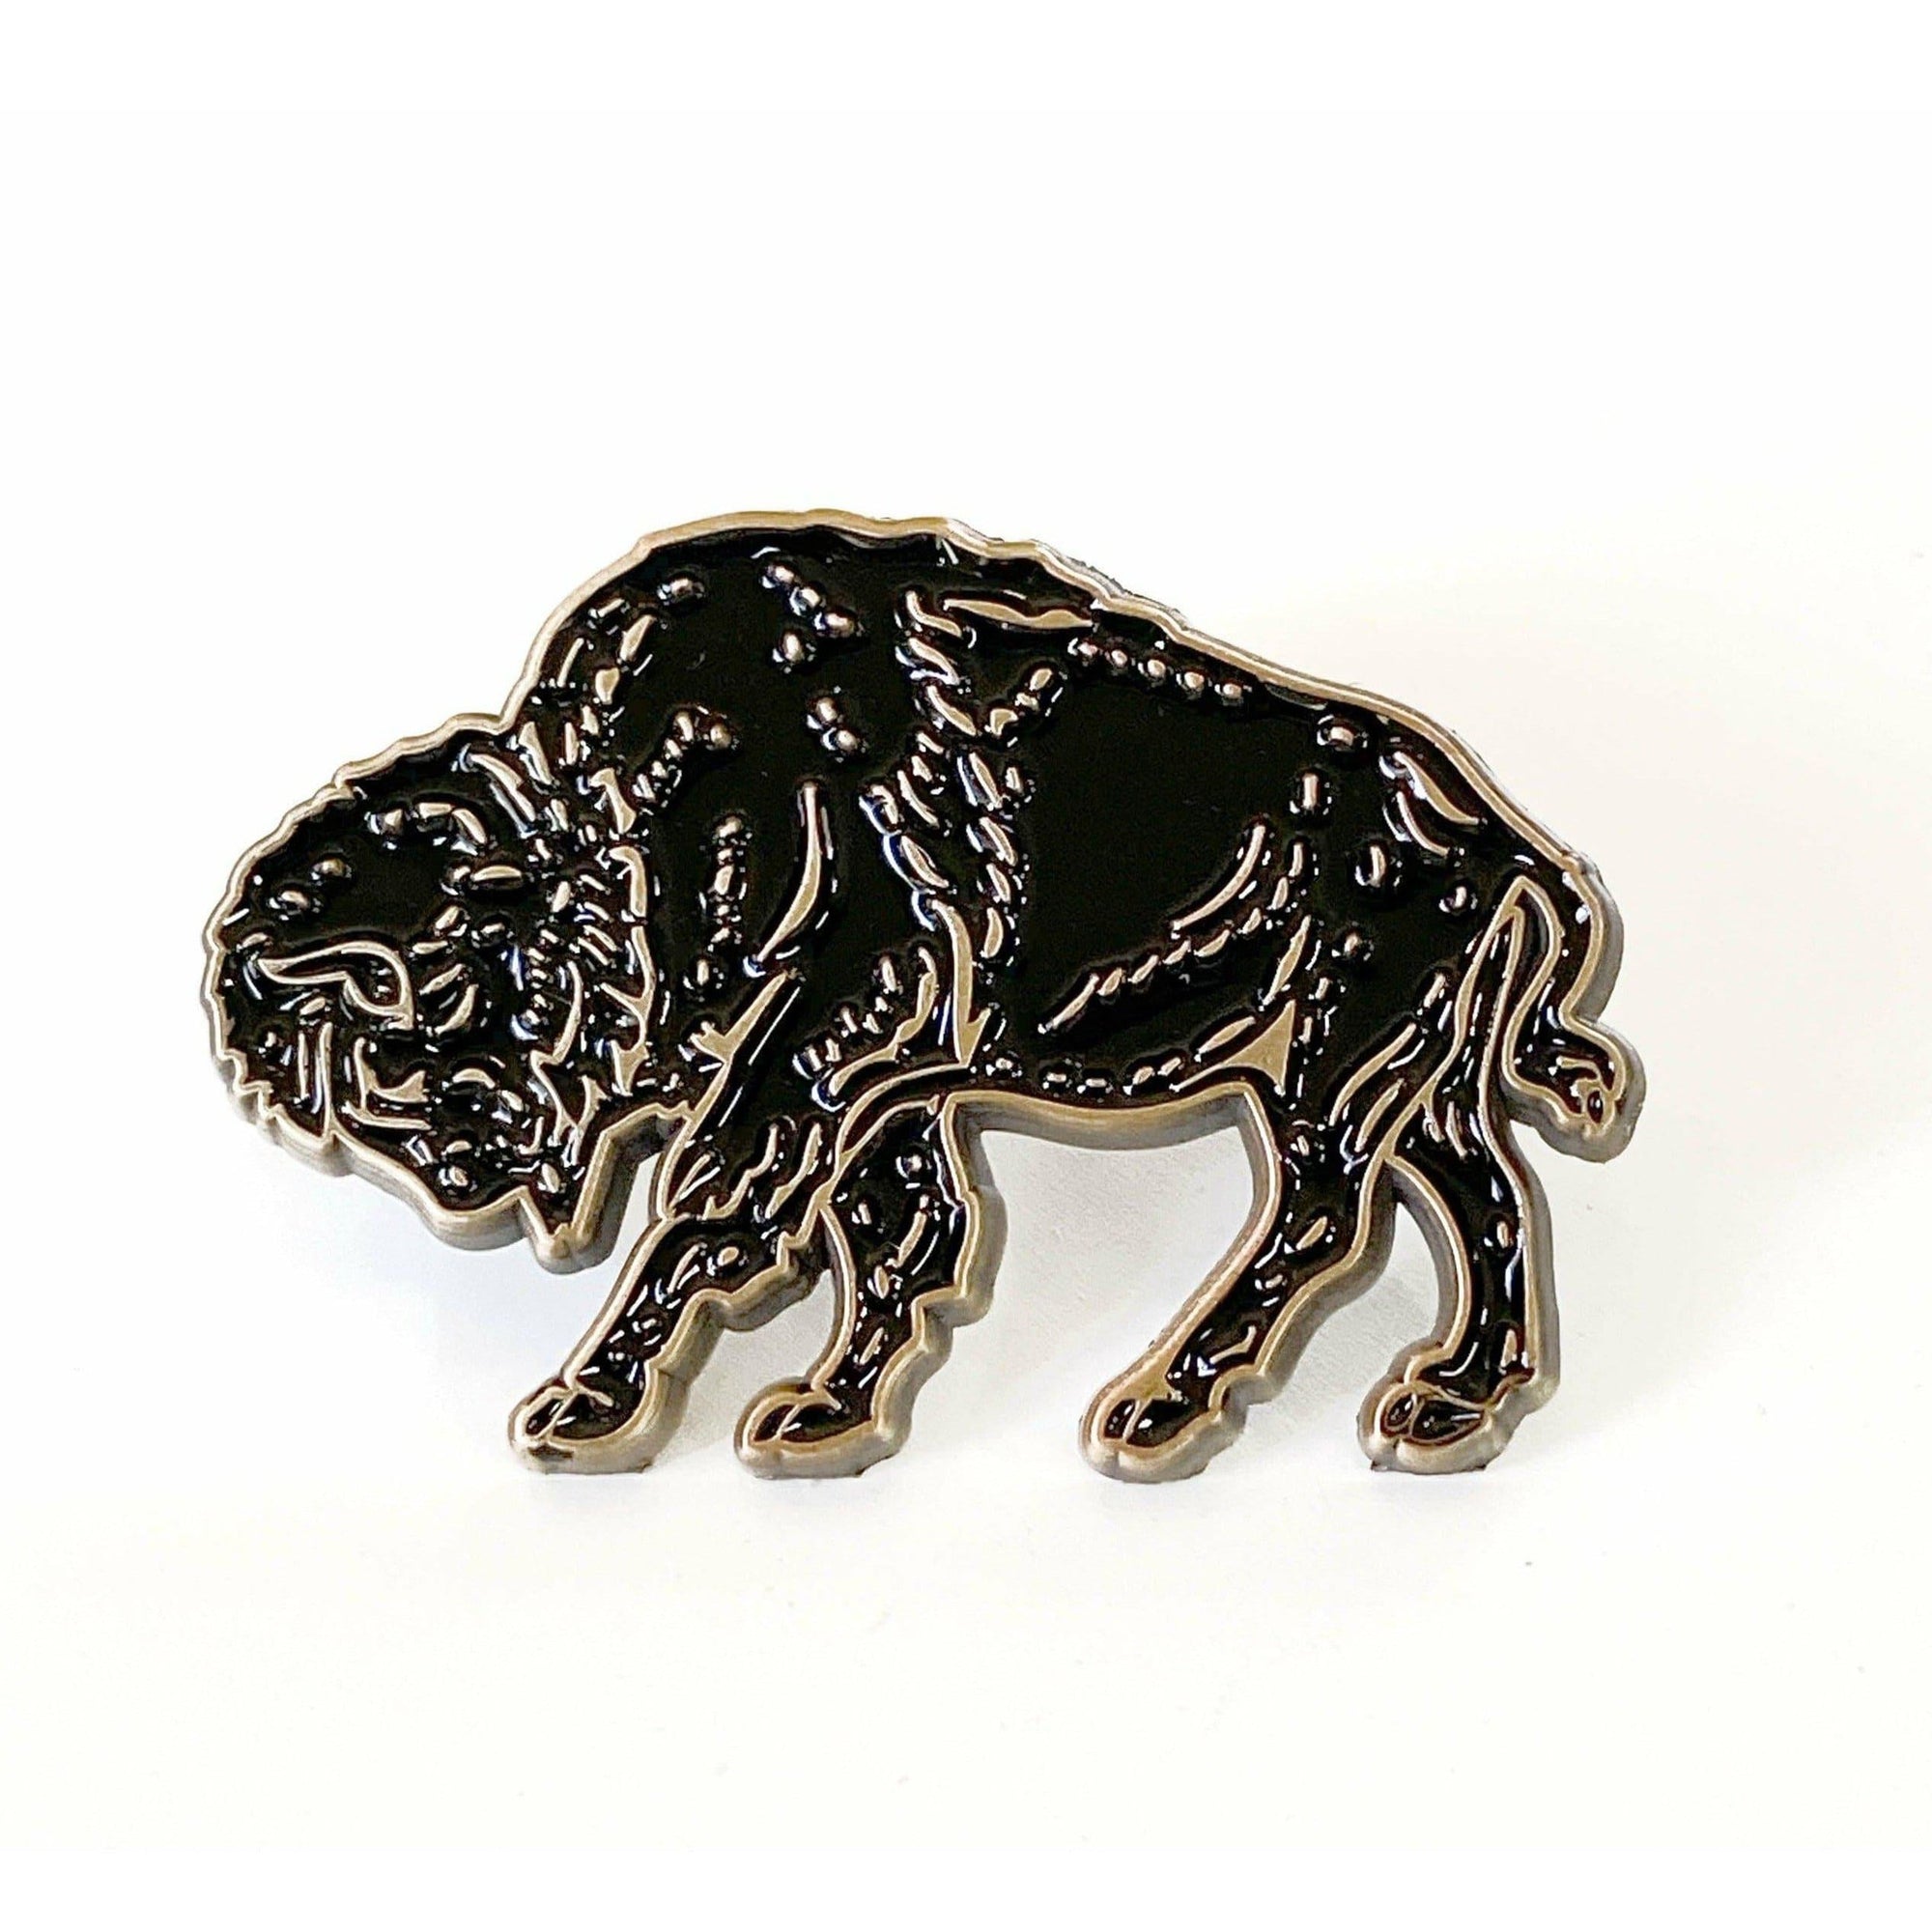 The Bison Enamel Pin by The Wild Wander.